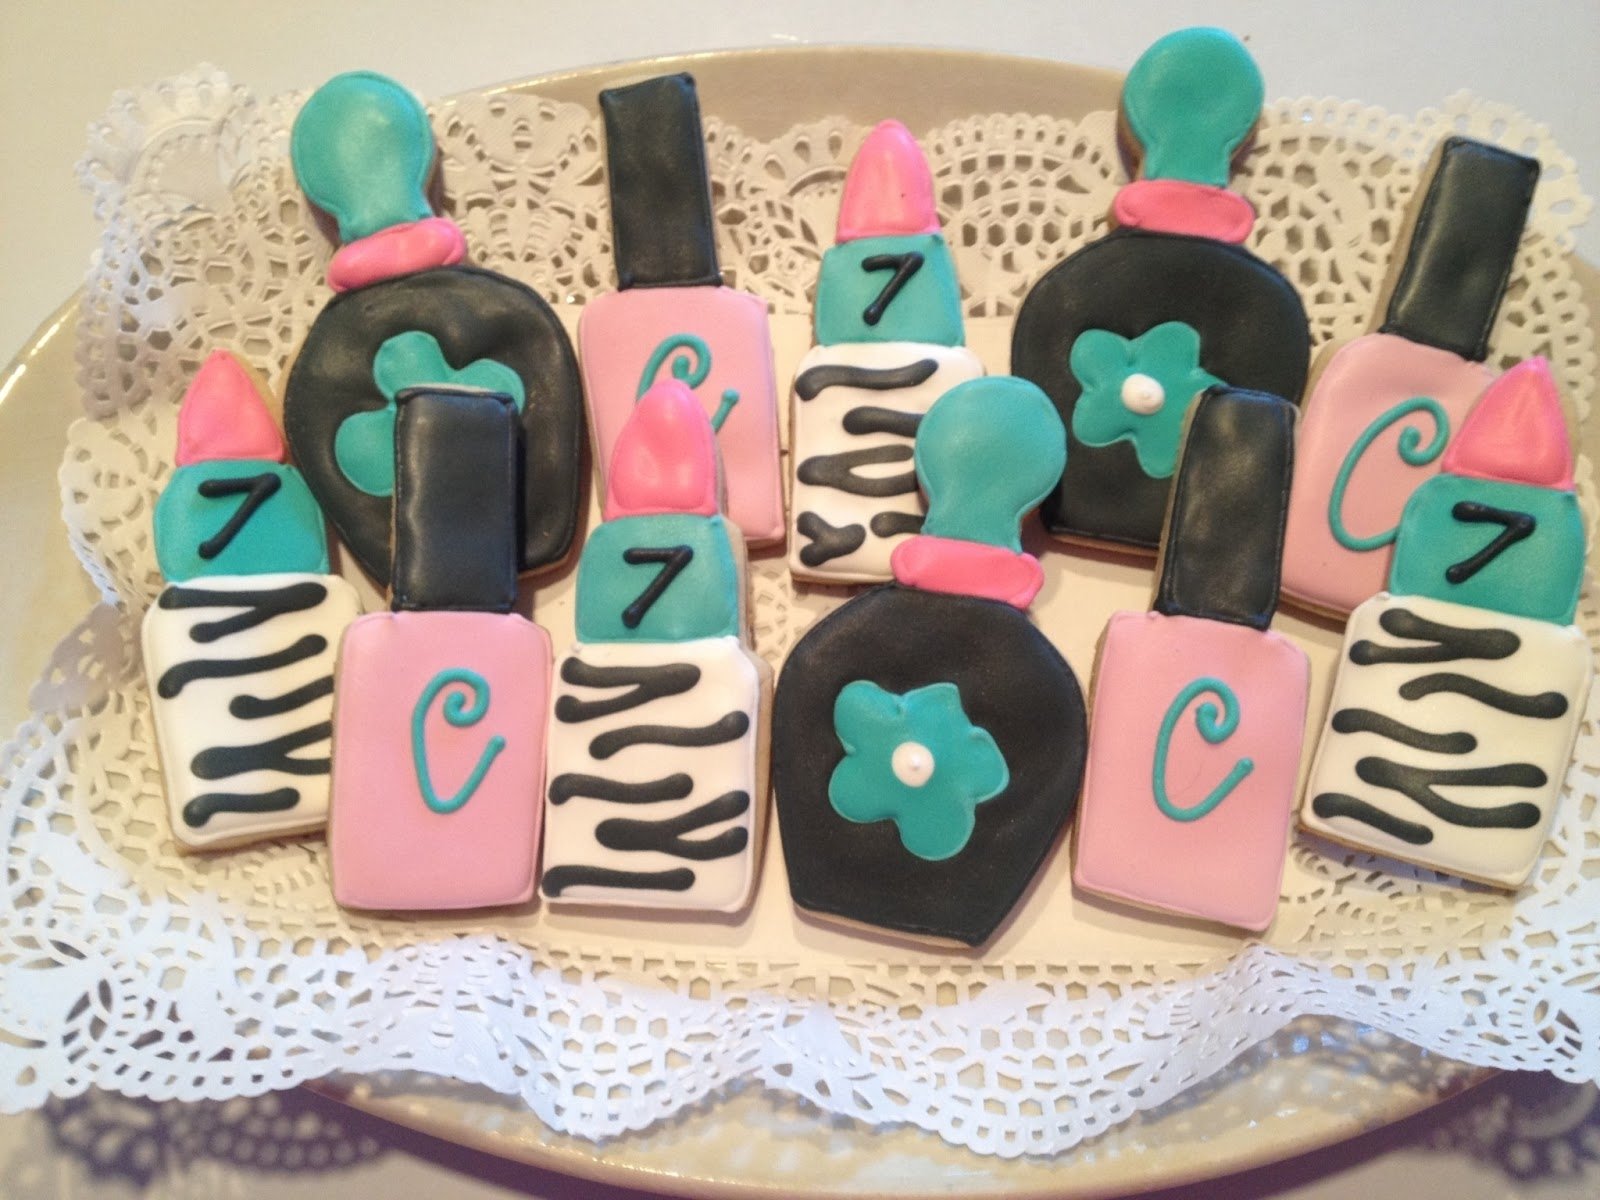 10 Gorgeous Birthday Party Ideas For A 13 Year Old Girl one preppy cookie spa birthday party cookies 2022